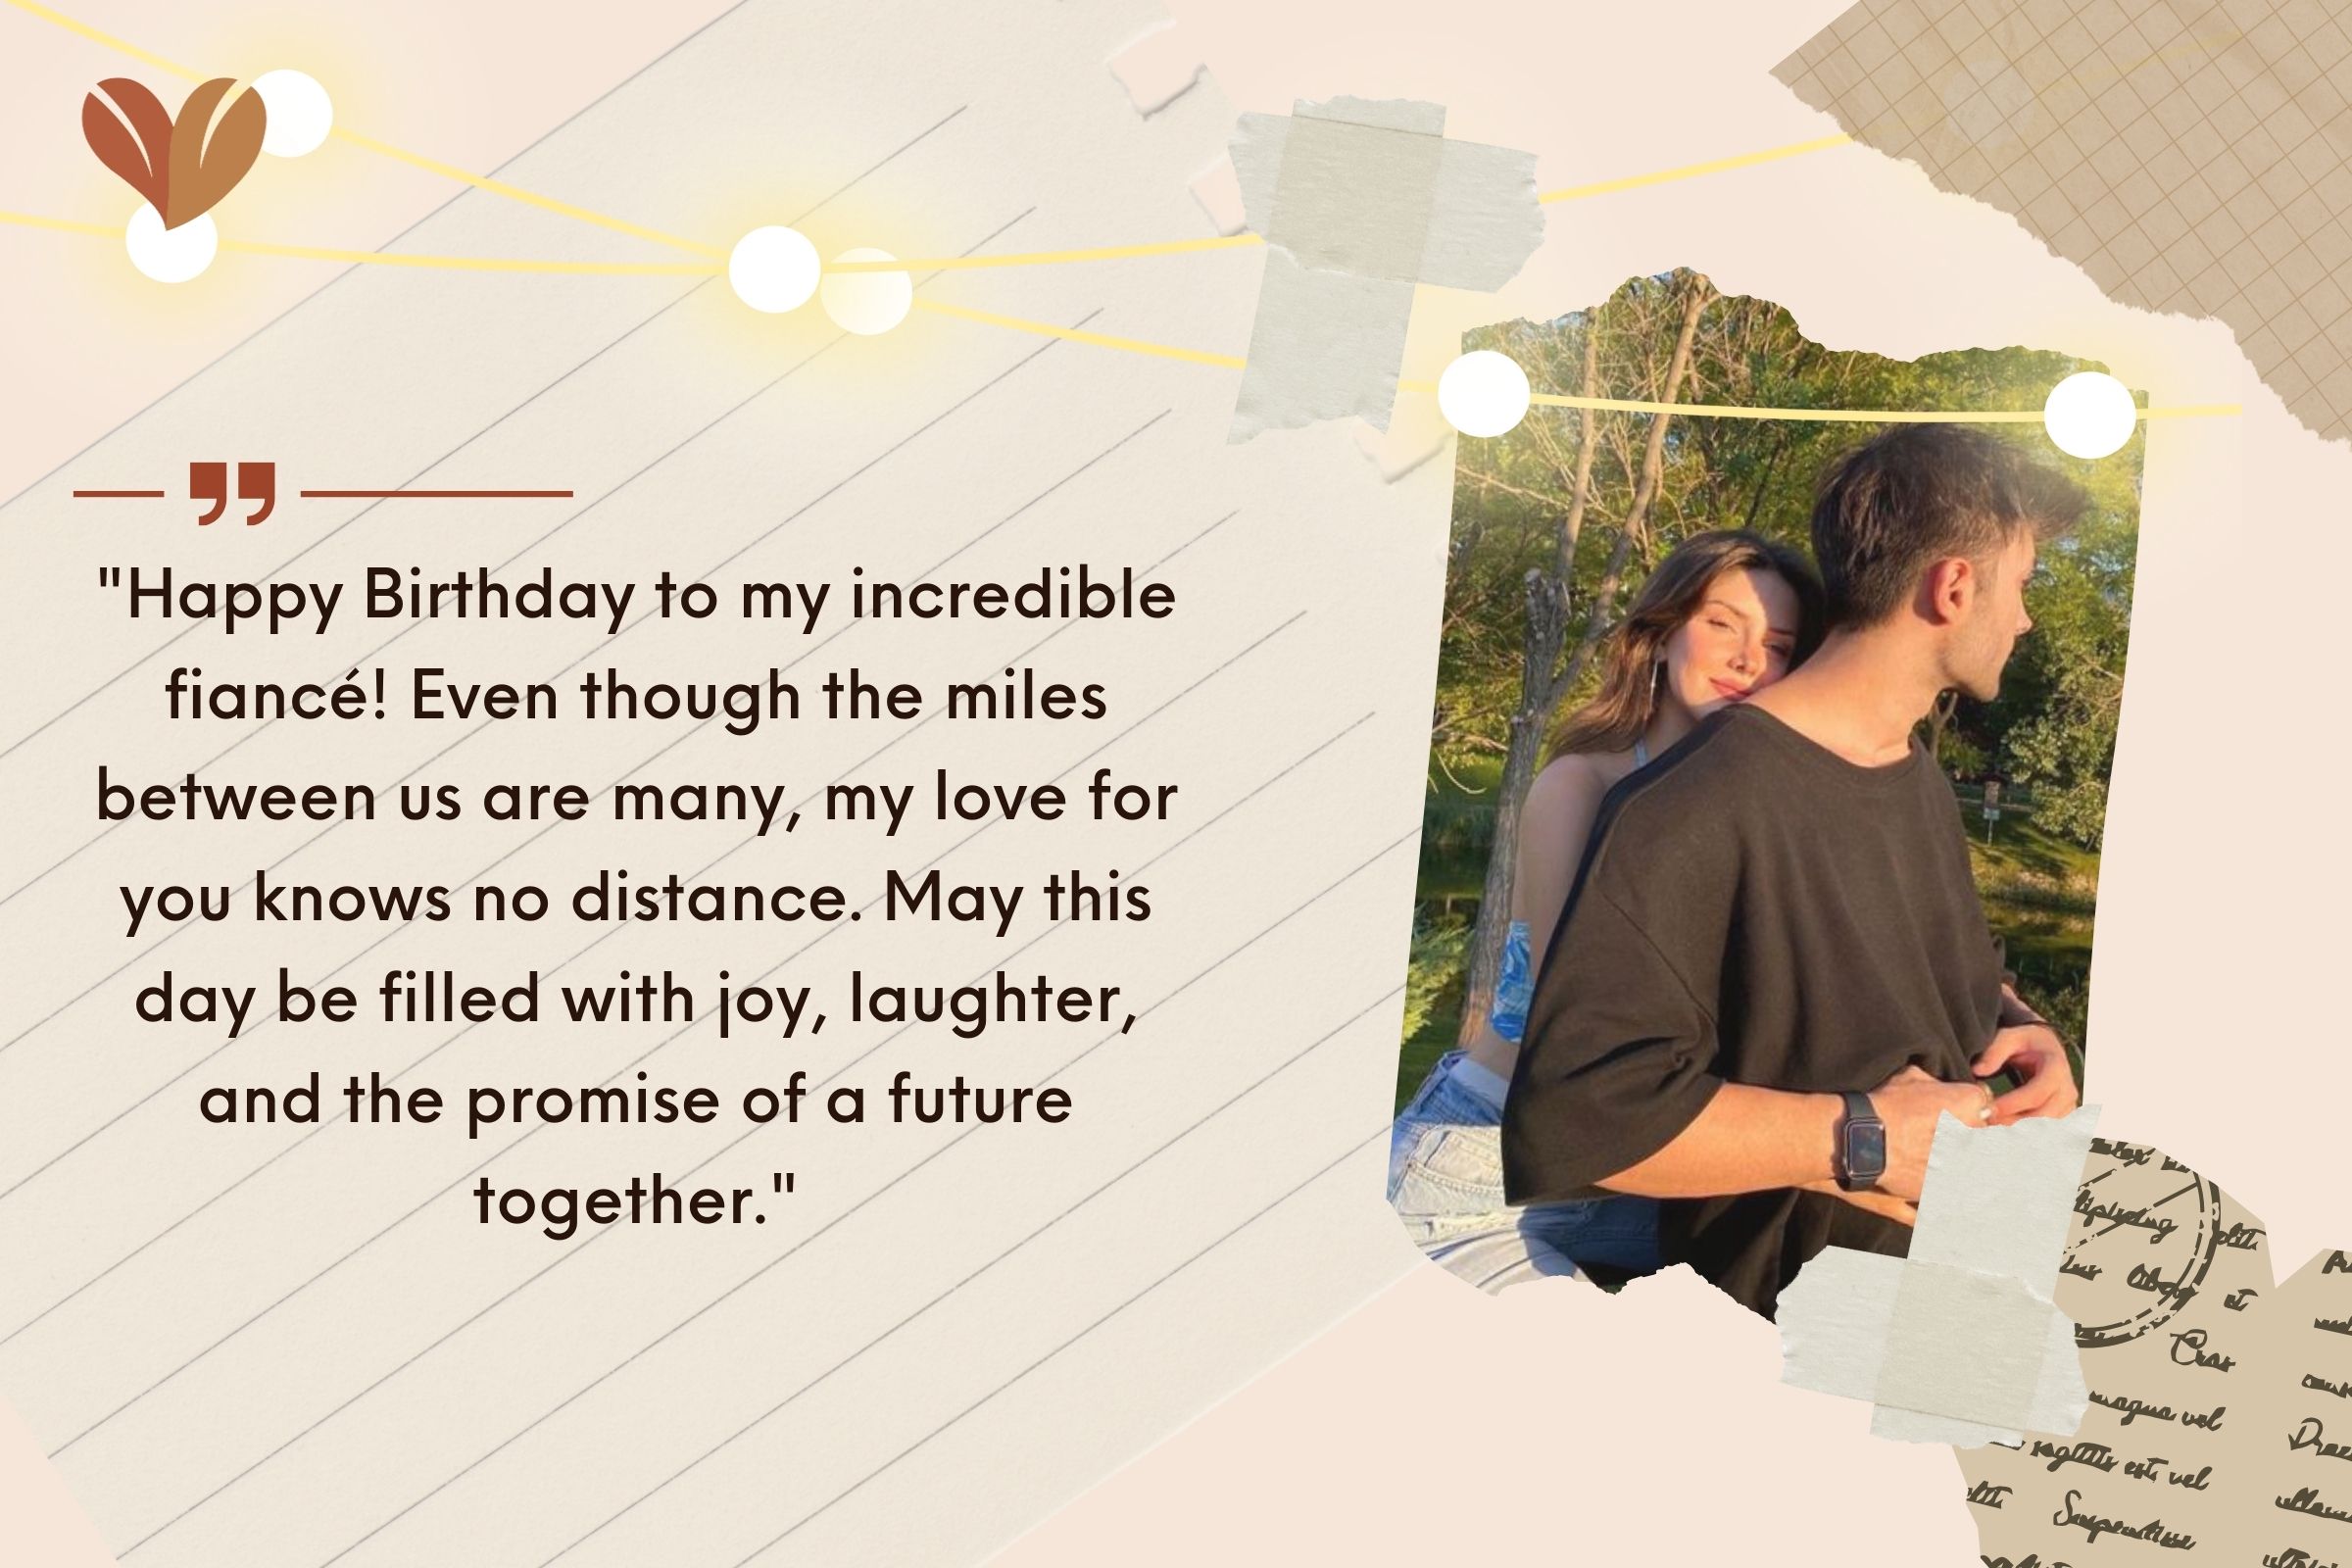 Miles Apart, Hearts Connected: Birthday Wishes Fiance